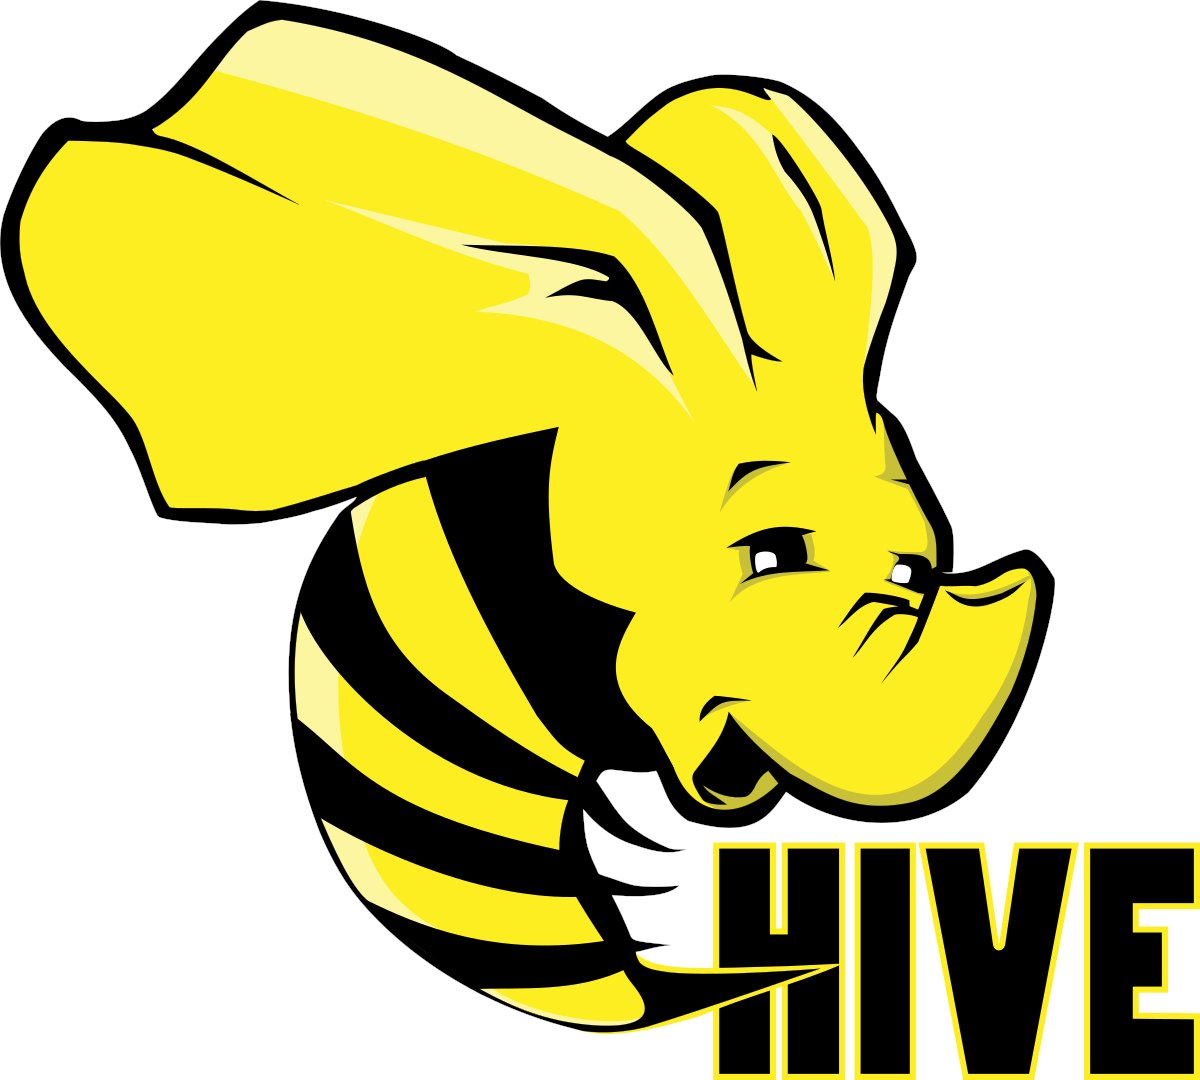 Apache Hive 4.0.0 GA released!!!
Announcement: s.apache.org/4.0announce
Change Log: s.apache.org/4.0changelog
DockerHub: s.apache.org/4.0docker
Major Changes: s.apache.org/4.0majorchanges
Thanx to all the contributors who worked towards this release!!!
#apache #hive #opensource